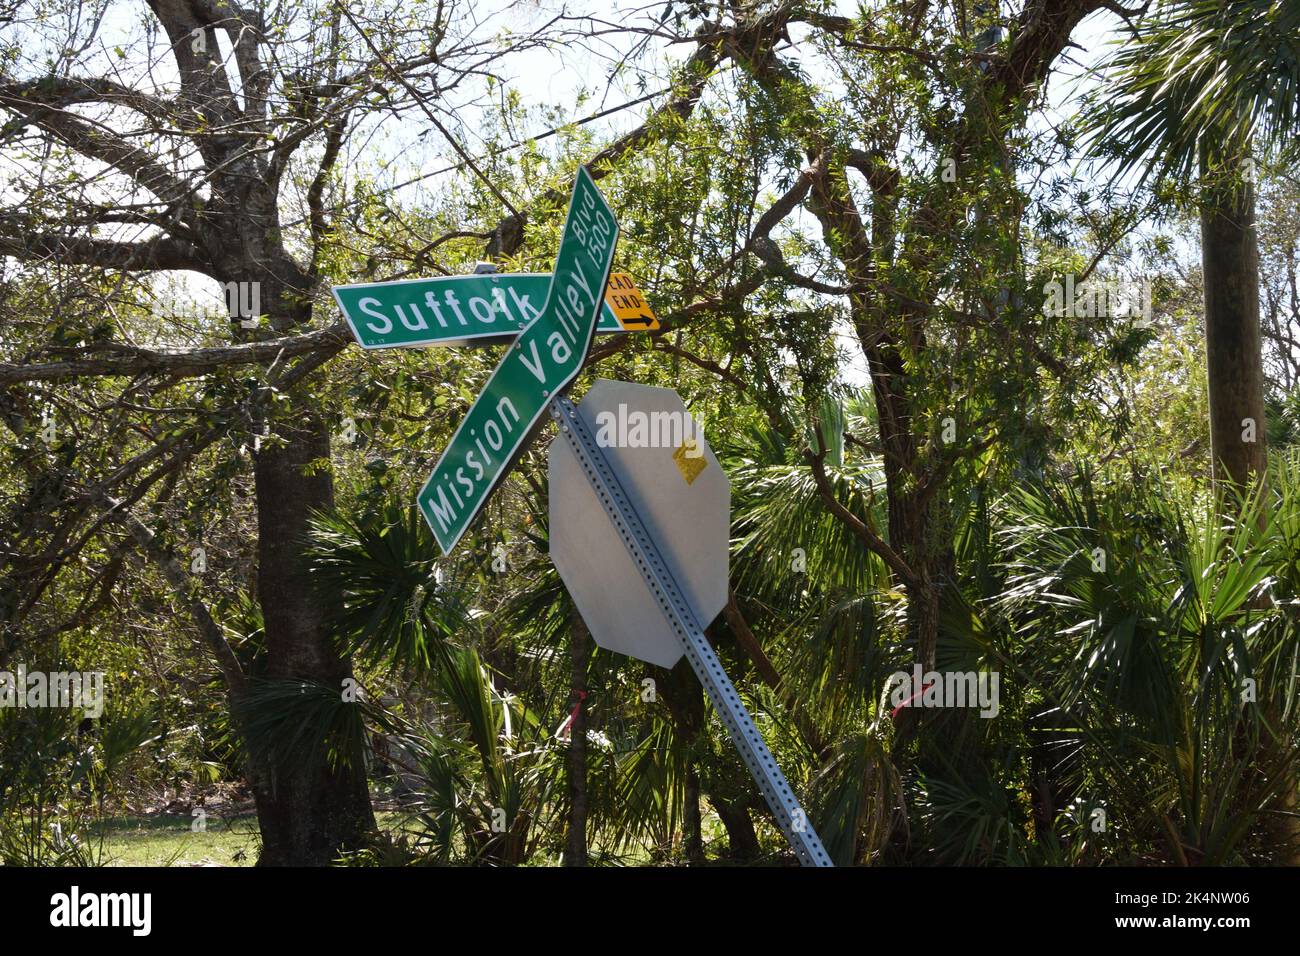 The aftermath of hurricane Ian, category 4, hitting southwest Florida on Sept 28, 2022.The road sign in Nokomis was bent due to severe windstorm. Stock Photo